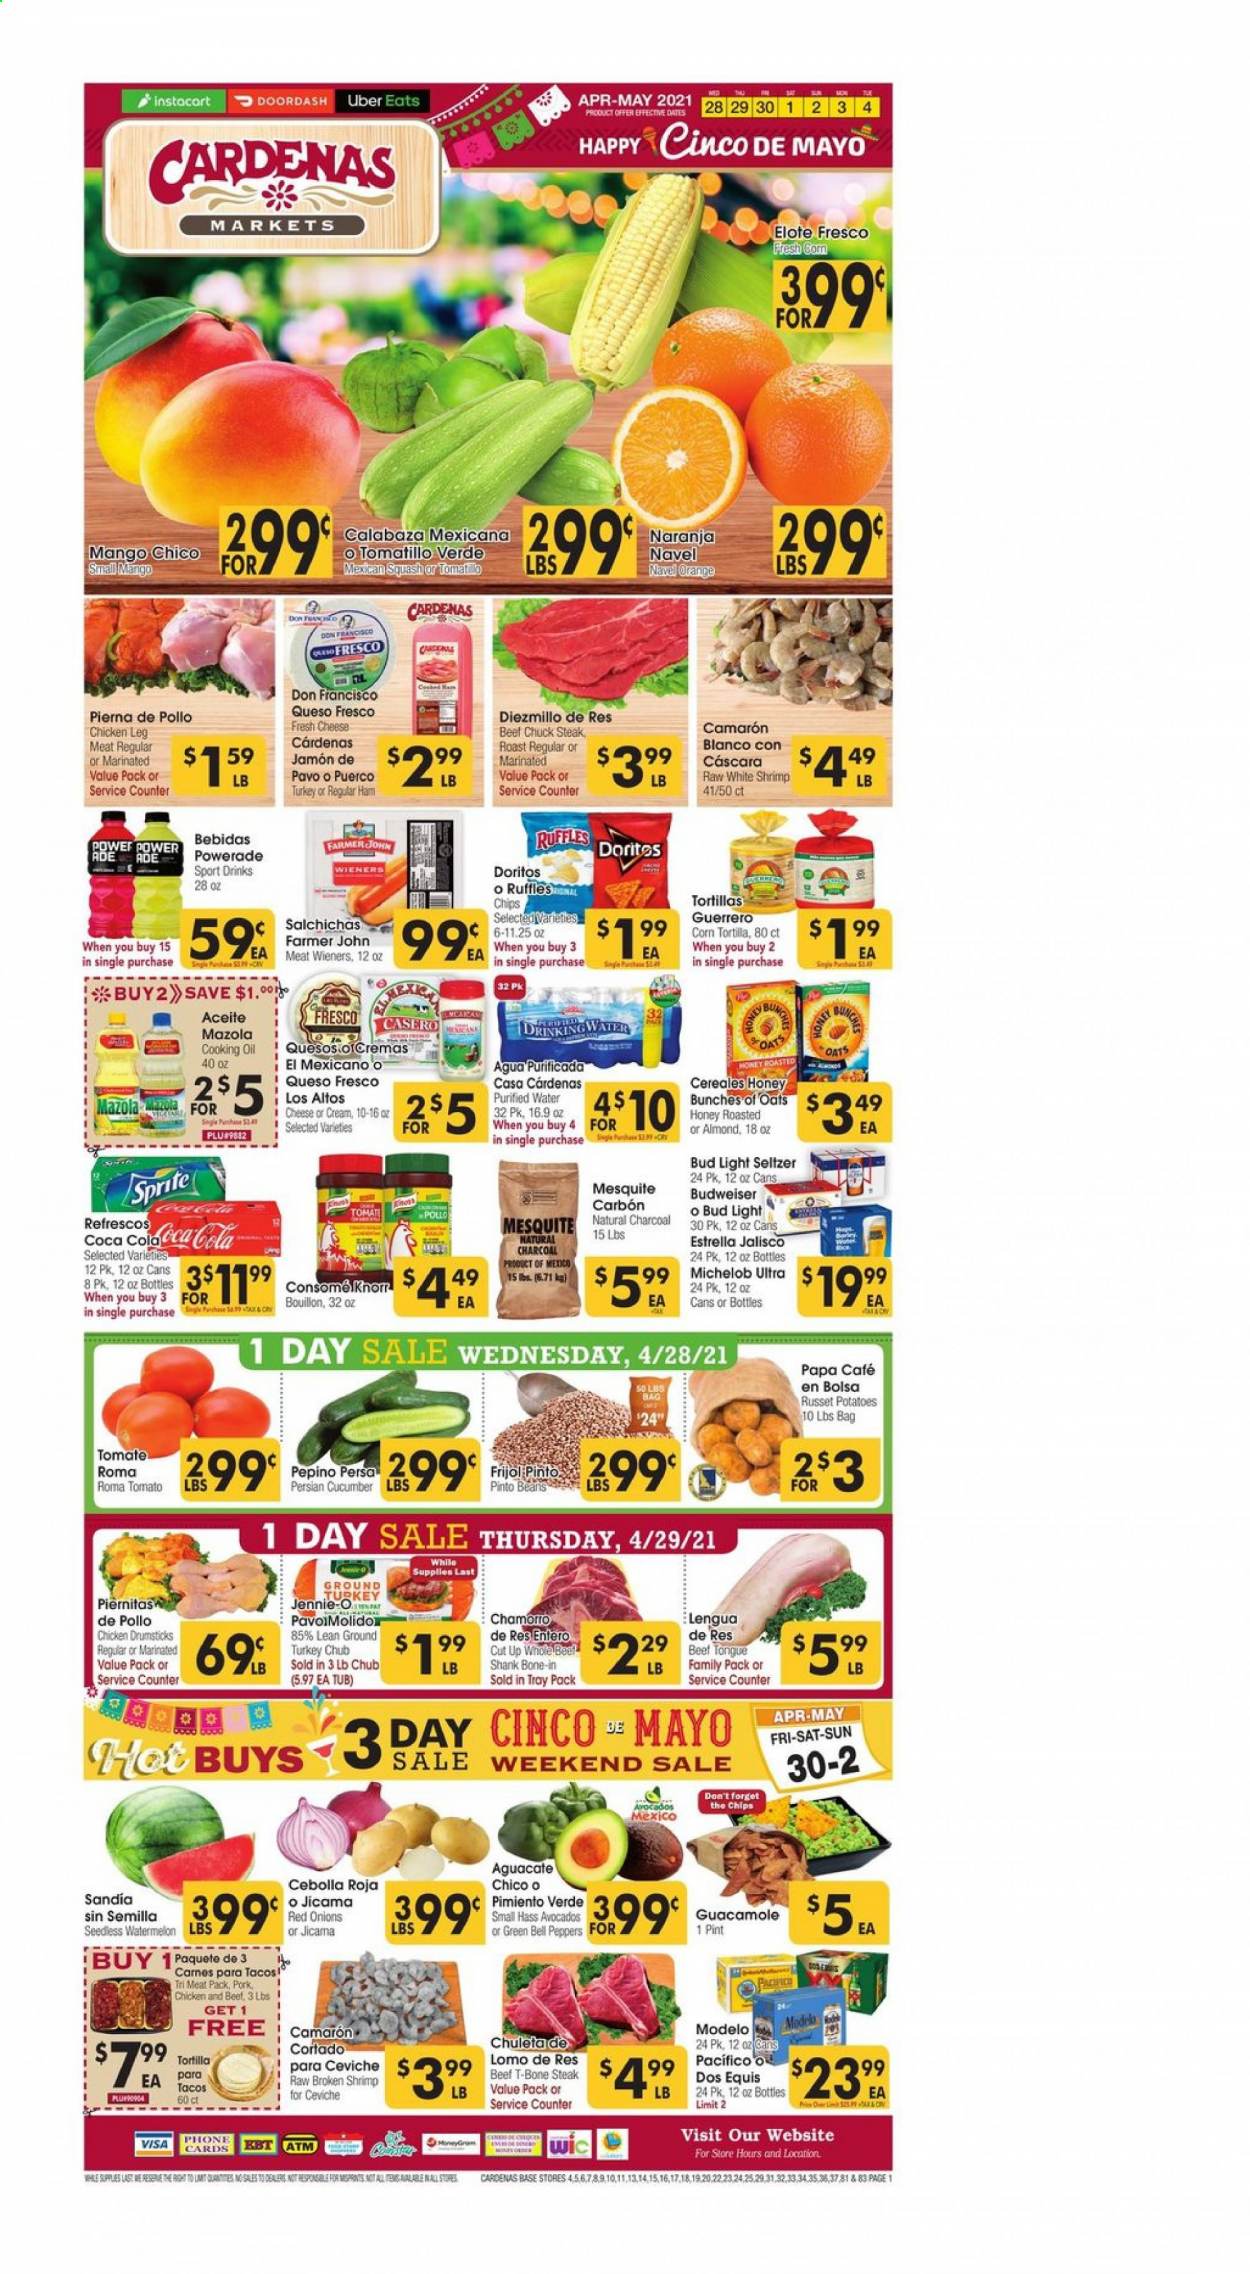 thumbnail - Cardenas Flyer - 04/28/2021 - 05/04/2021 - Sales products - tortillas, beans, bell peppers, corn, russet potatoes, tomatillo, tomatoes, potatoes, jicama, peppers, mango, watermelon, oranges, shrimps, Knorr, ham, guacamole, queso fresco, Doritos, chips, Ruffles, bouillon, pinto beans, rice, oil, Sprite, Powerade, purified water, Hard Seltzer, beer, Budweiser, Dos Equis, Michelob, Bud Light, Modelo, ground turkey, chicken legs, chicken drumsticks, beef meat, t-bone steak, steak, chuck steak, bunches, navel oranges. Page 1.